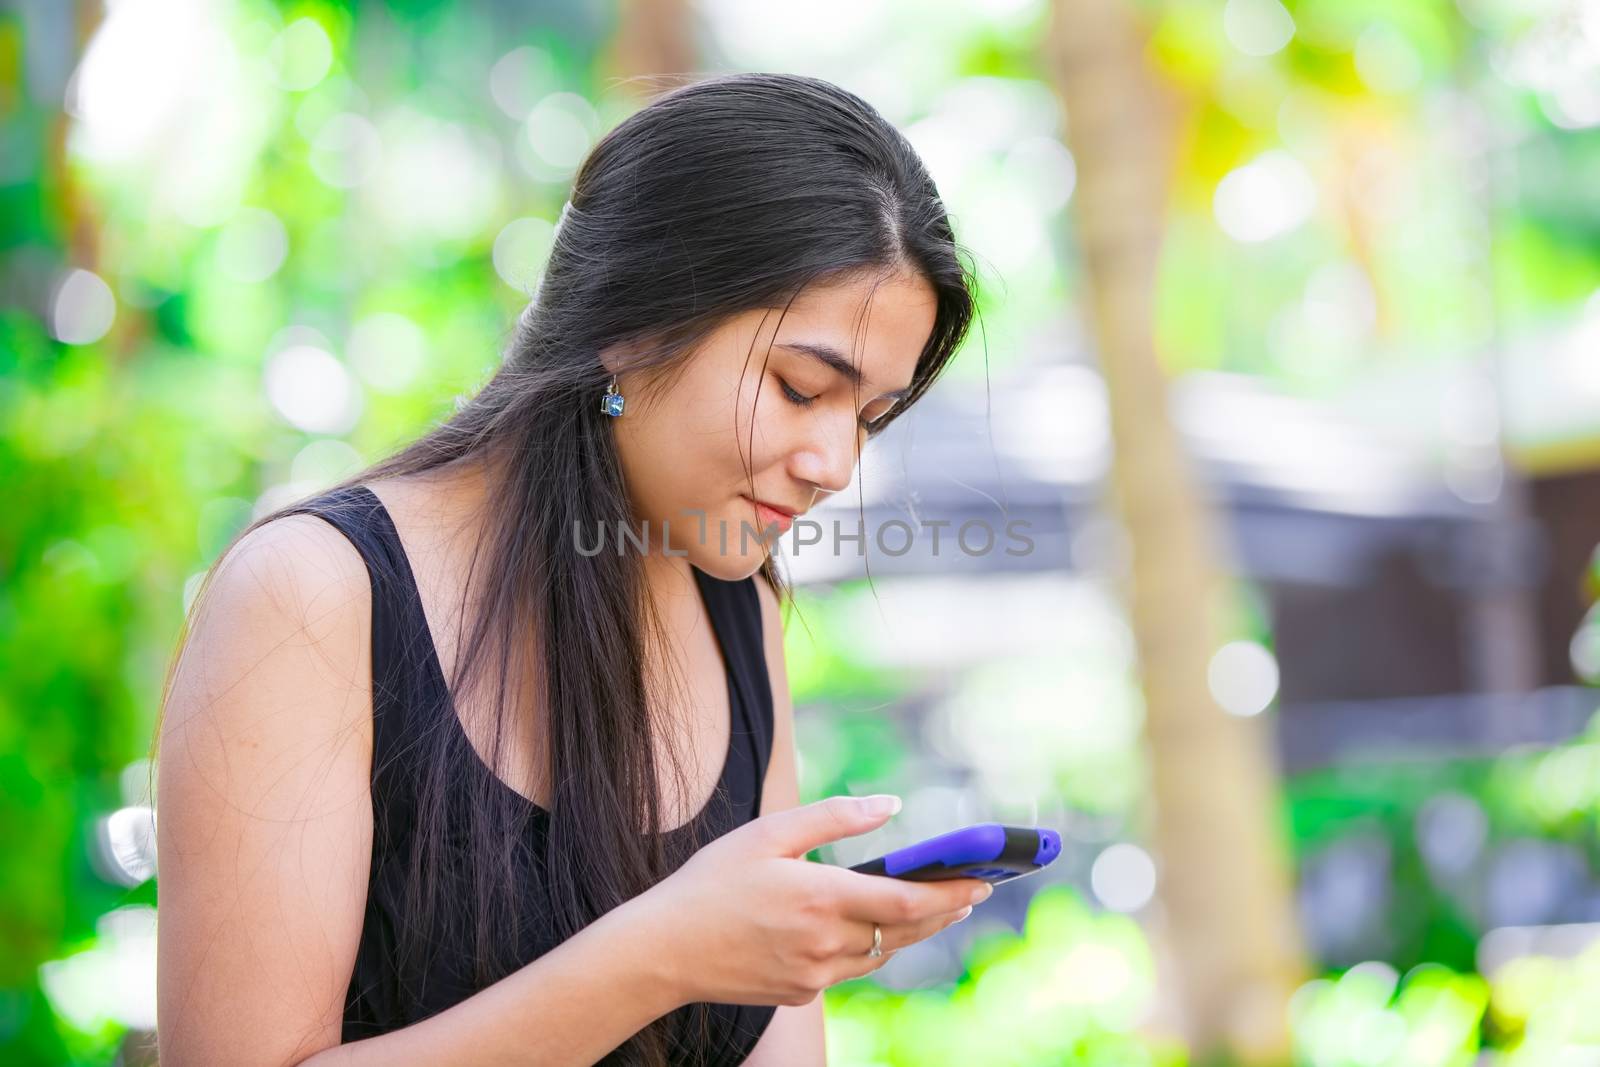 Beautiful biracial Asian Caucasian teen girl talking on cell phone outdoors with green foliage in background